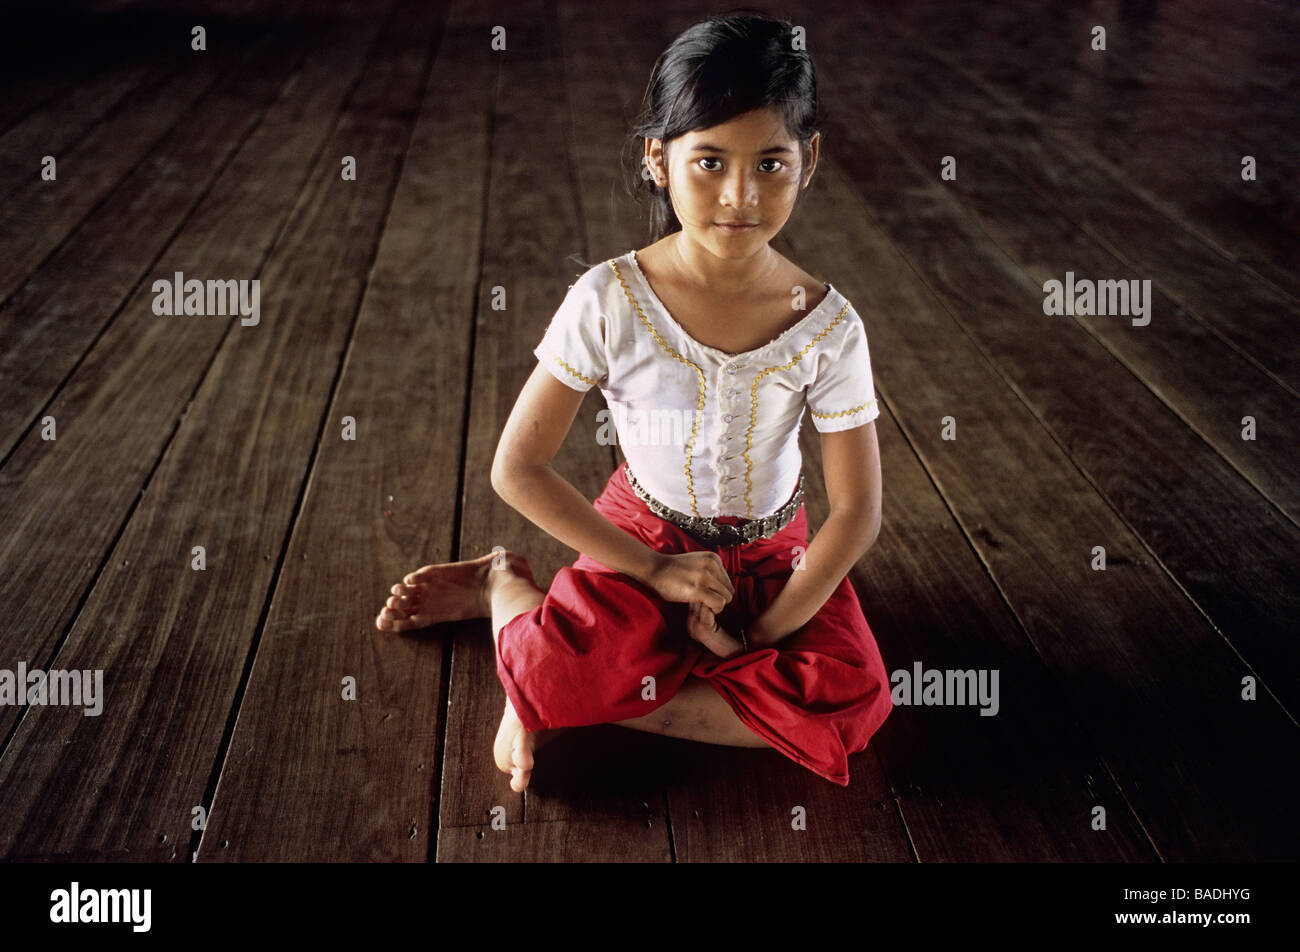 Cambodia, Phnom Penh, School of Apsara Khmer Dance, little girl in traditional outfit Stock Photo